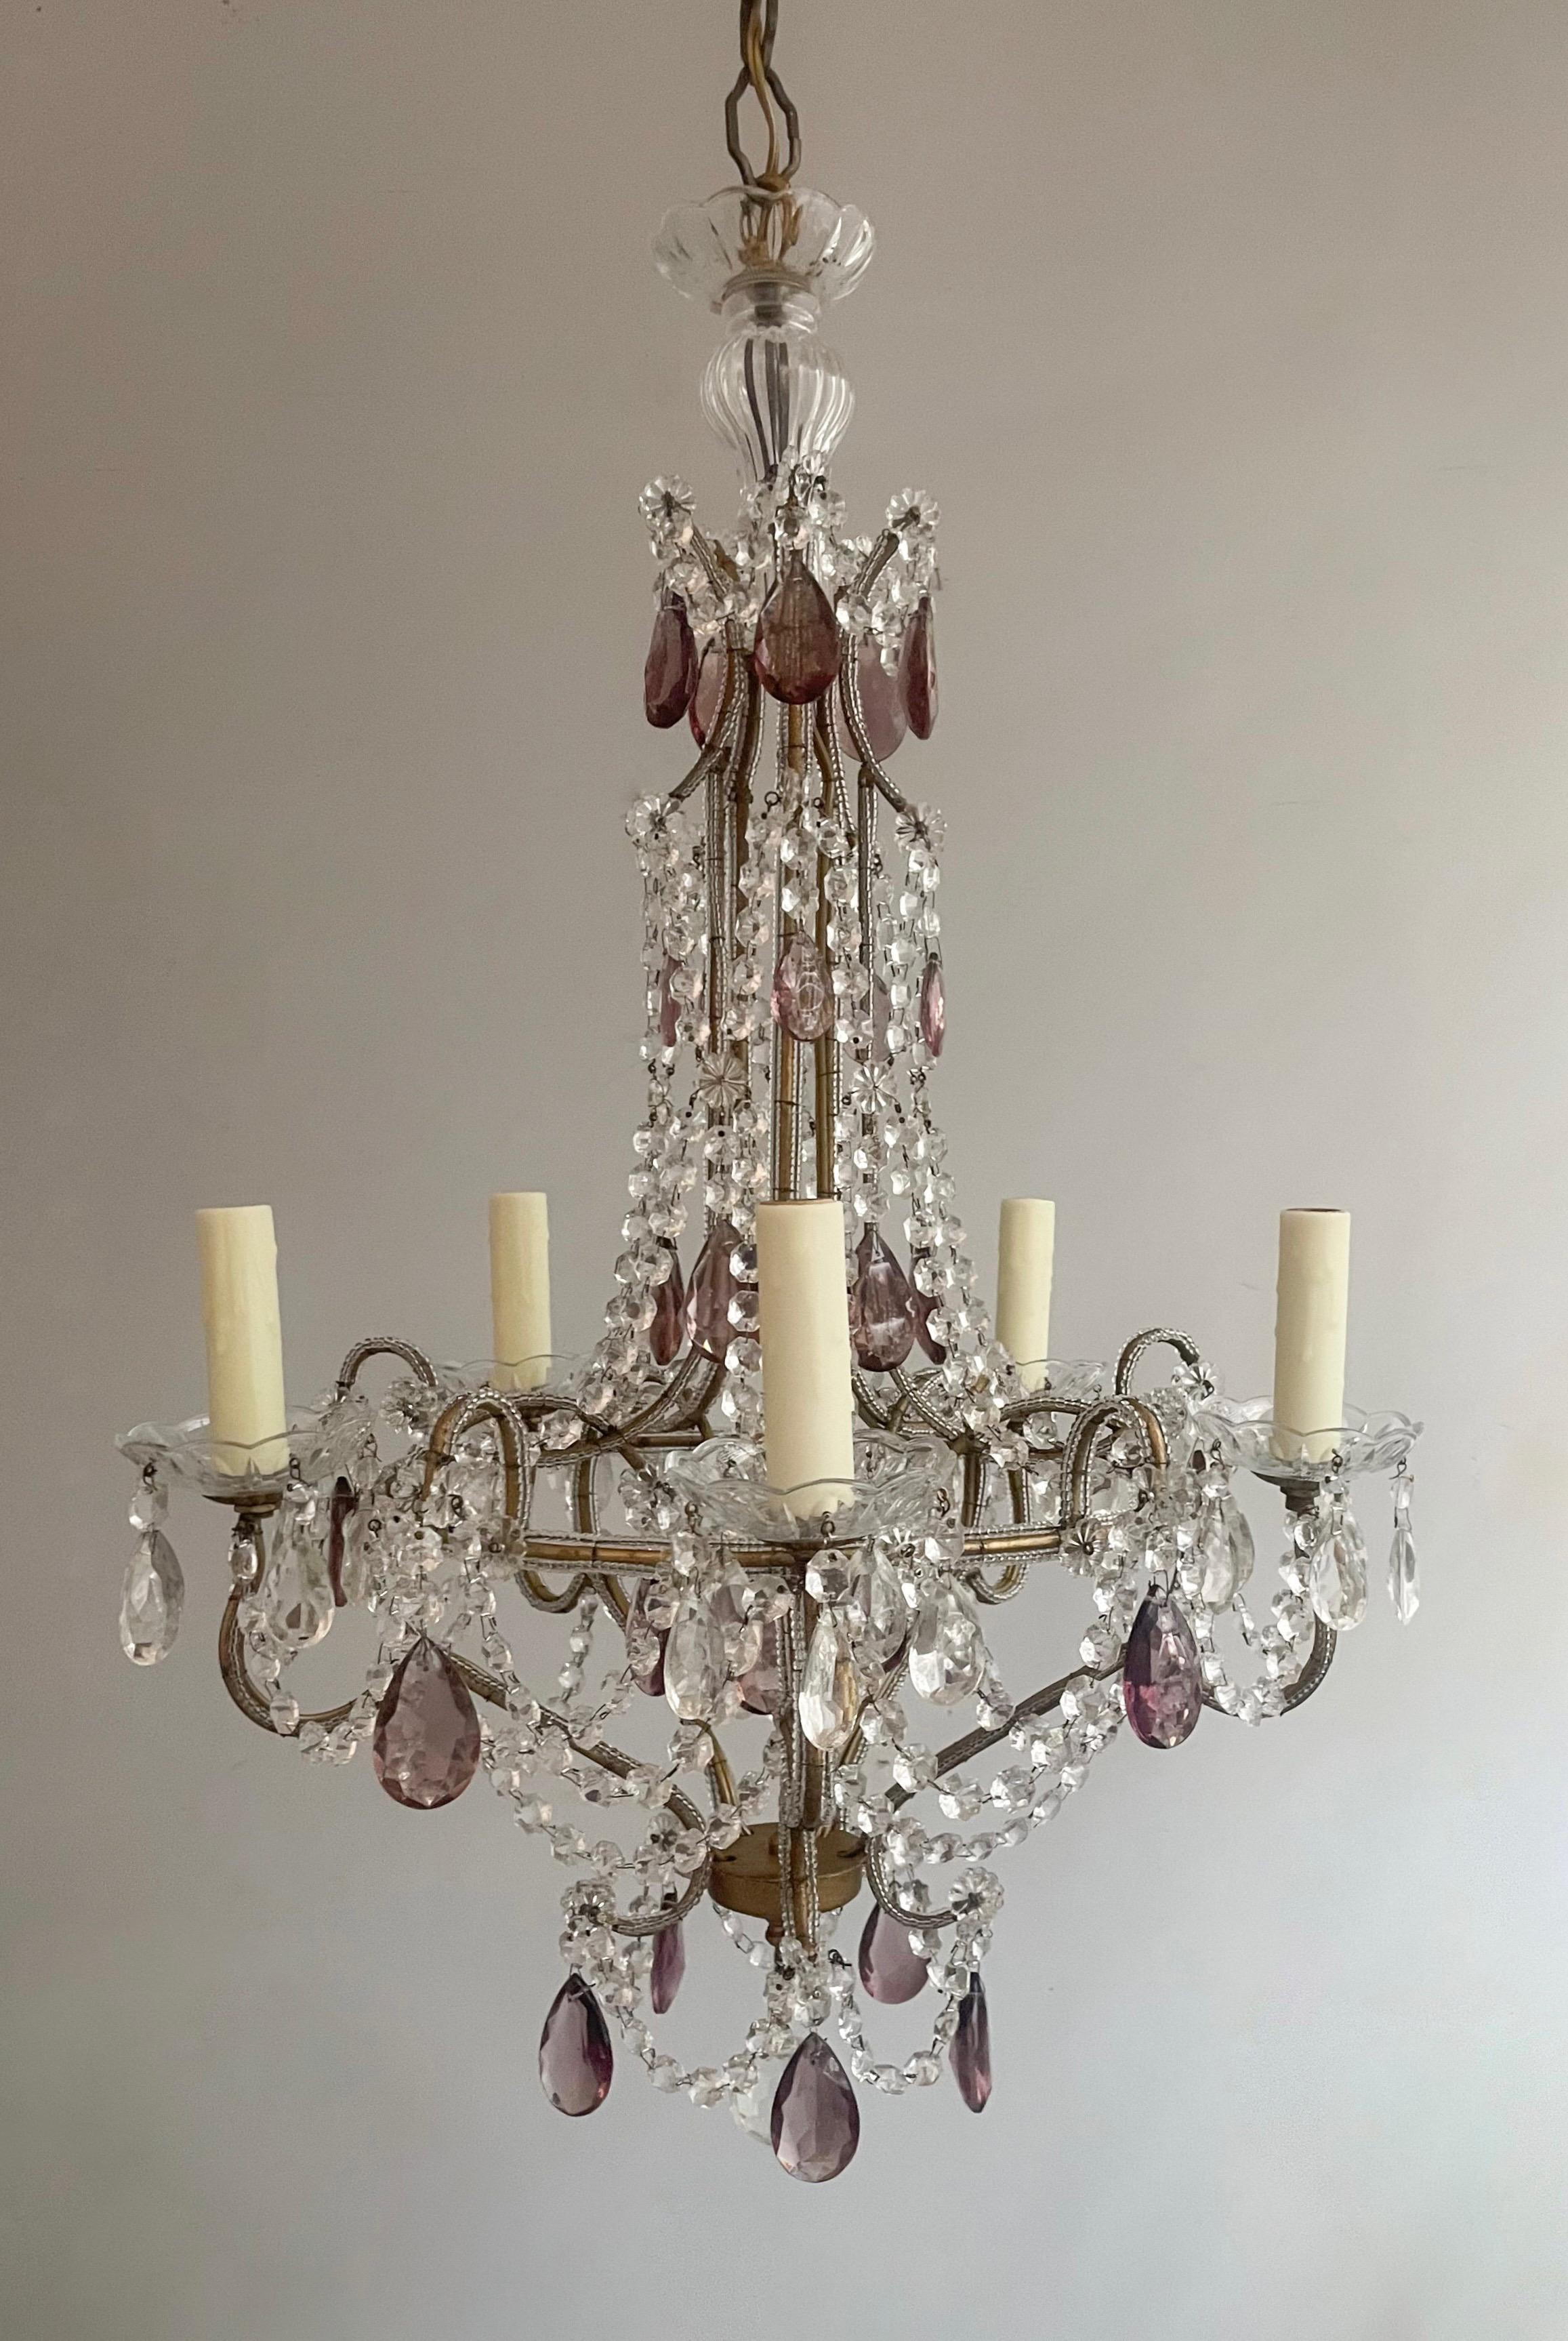 Beautiful, Italian 1960s gilt-iron and crystal beaded chandelier with amethyst drops.

The chandelier features a shapely scrolled-iron frame decorated with an abundance of glass beads and accented with amethyst glass faceted prisms. 

The chandelier